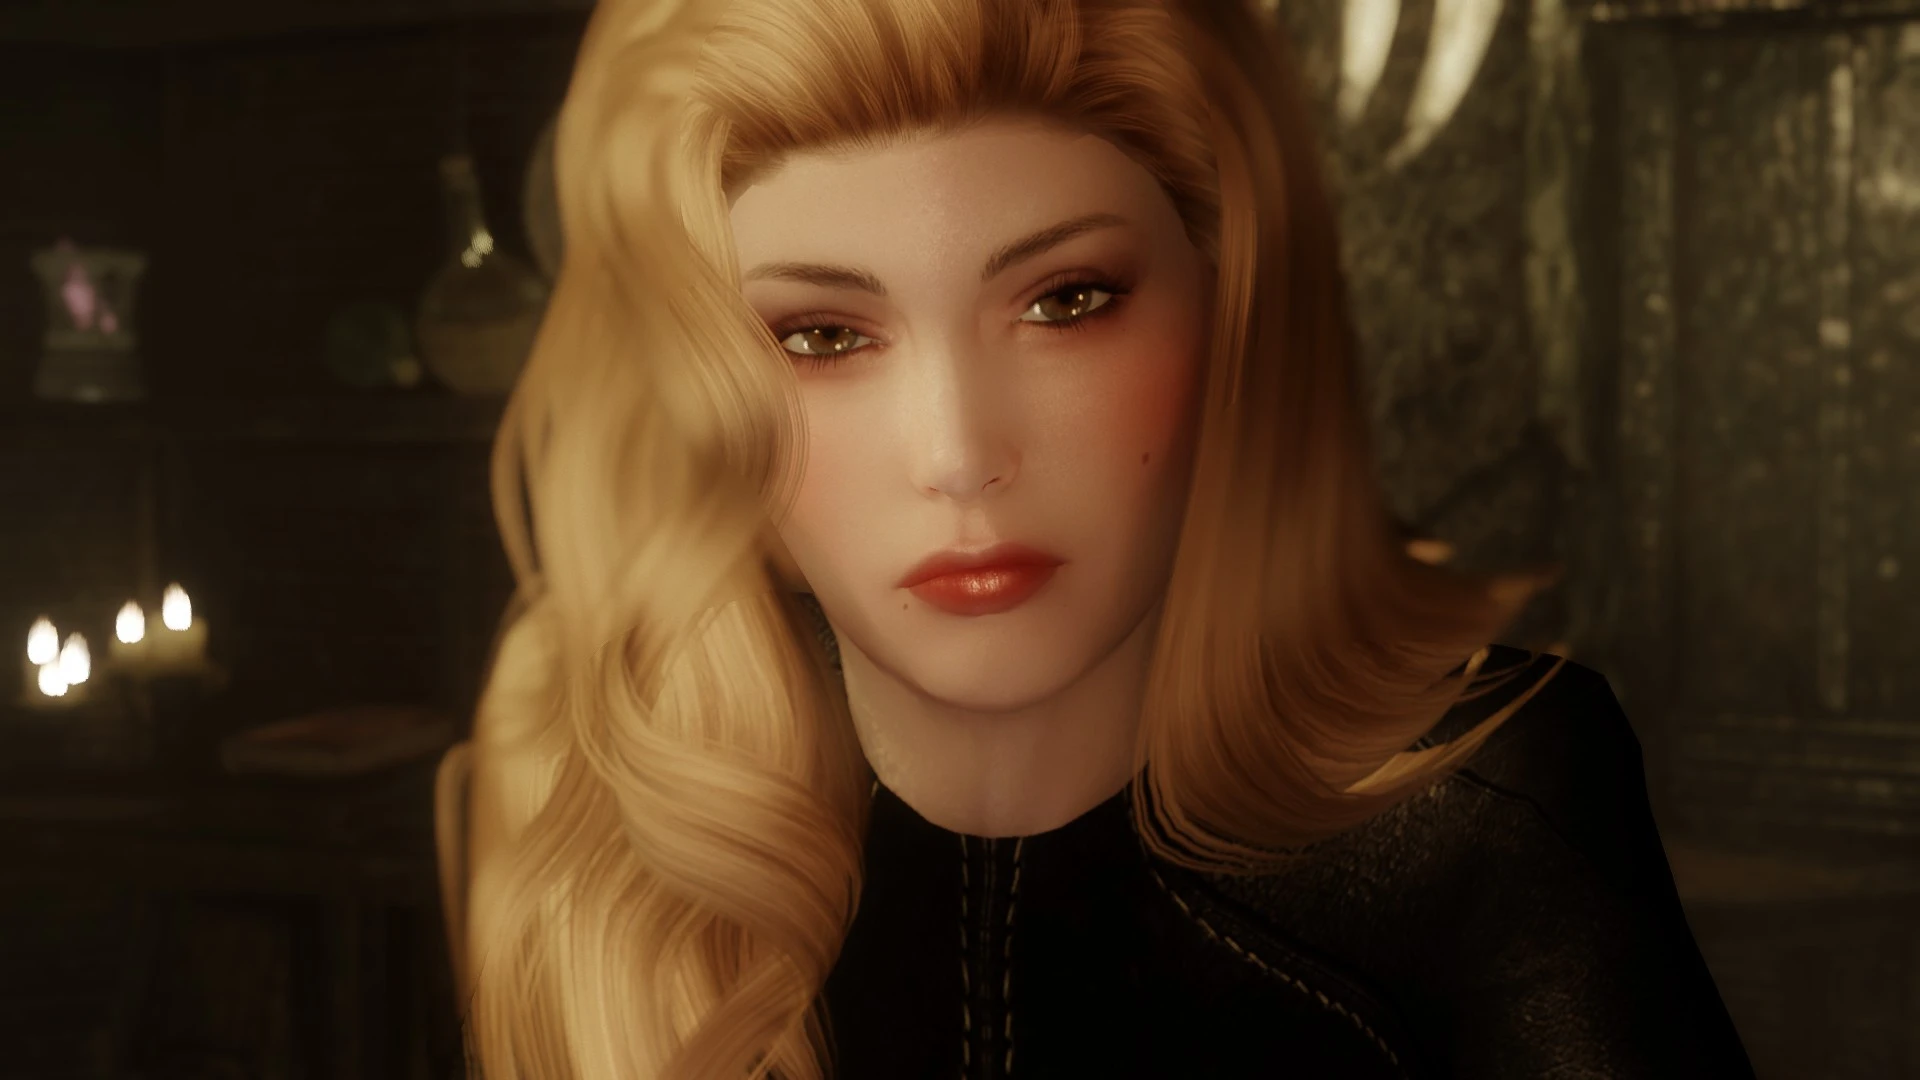 appearance of Astrid from my upcoming mod - Rei's Astrid Replacer - up...